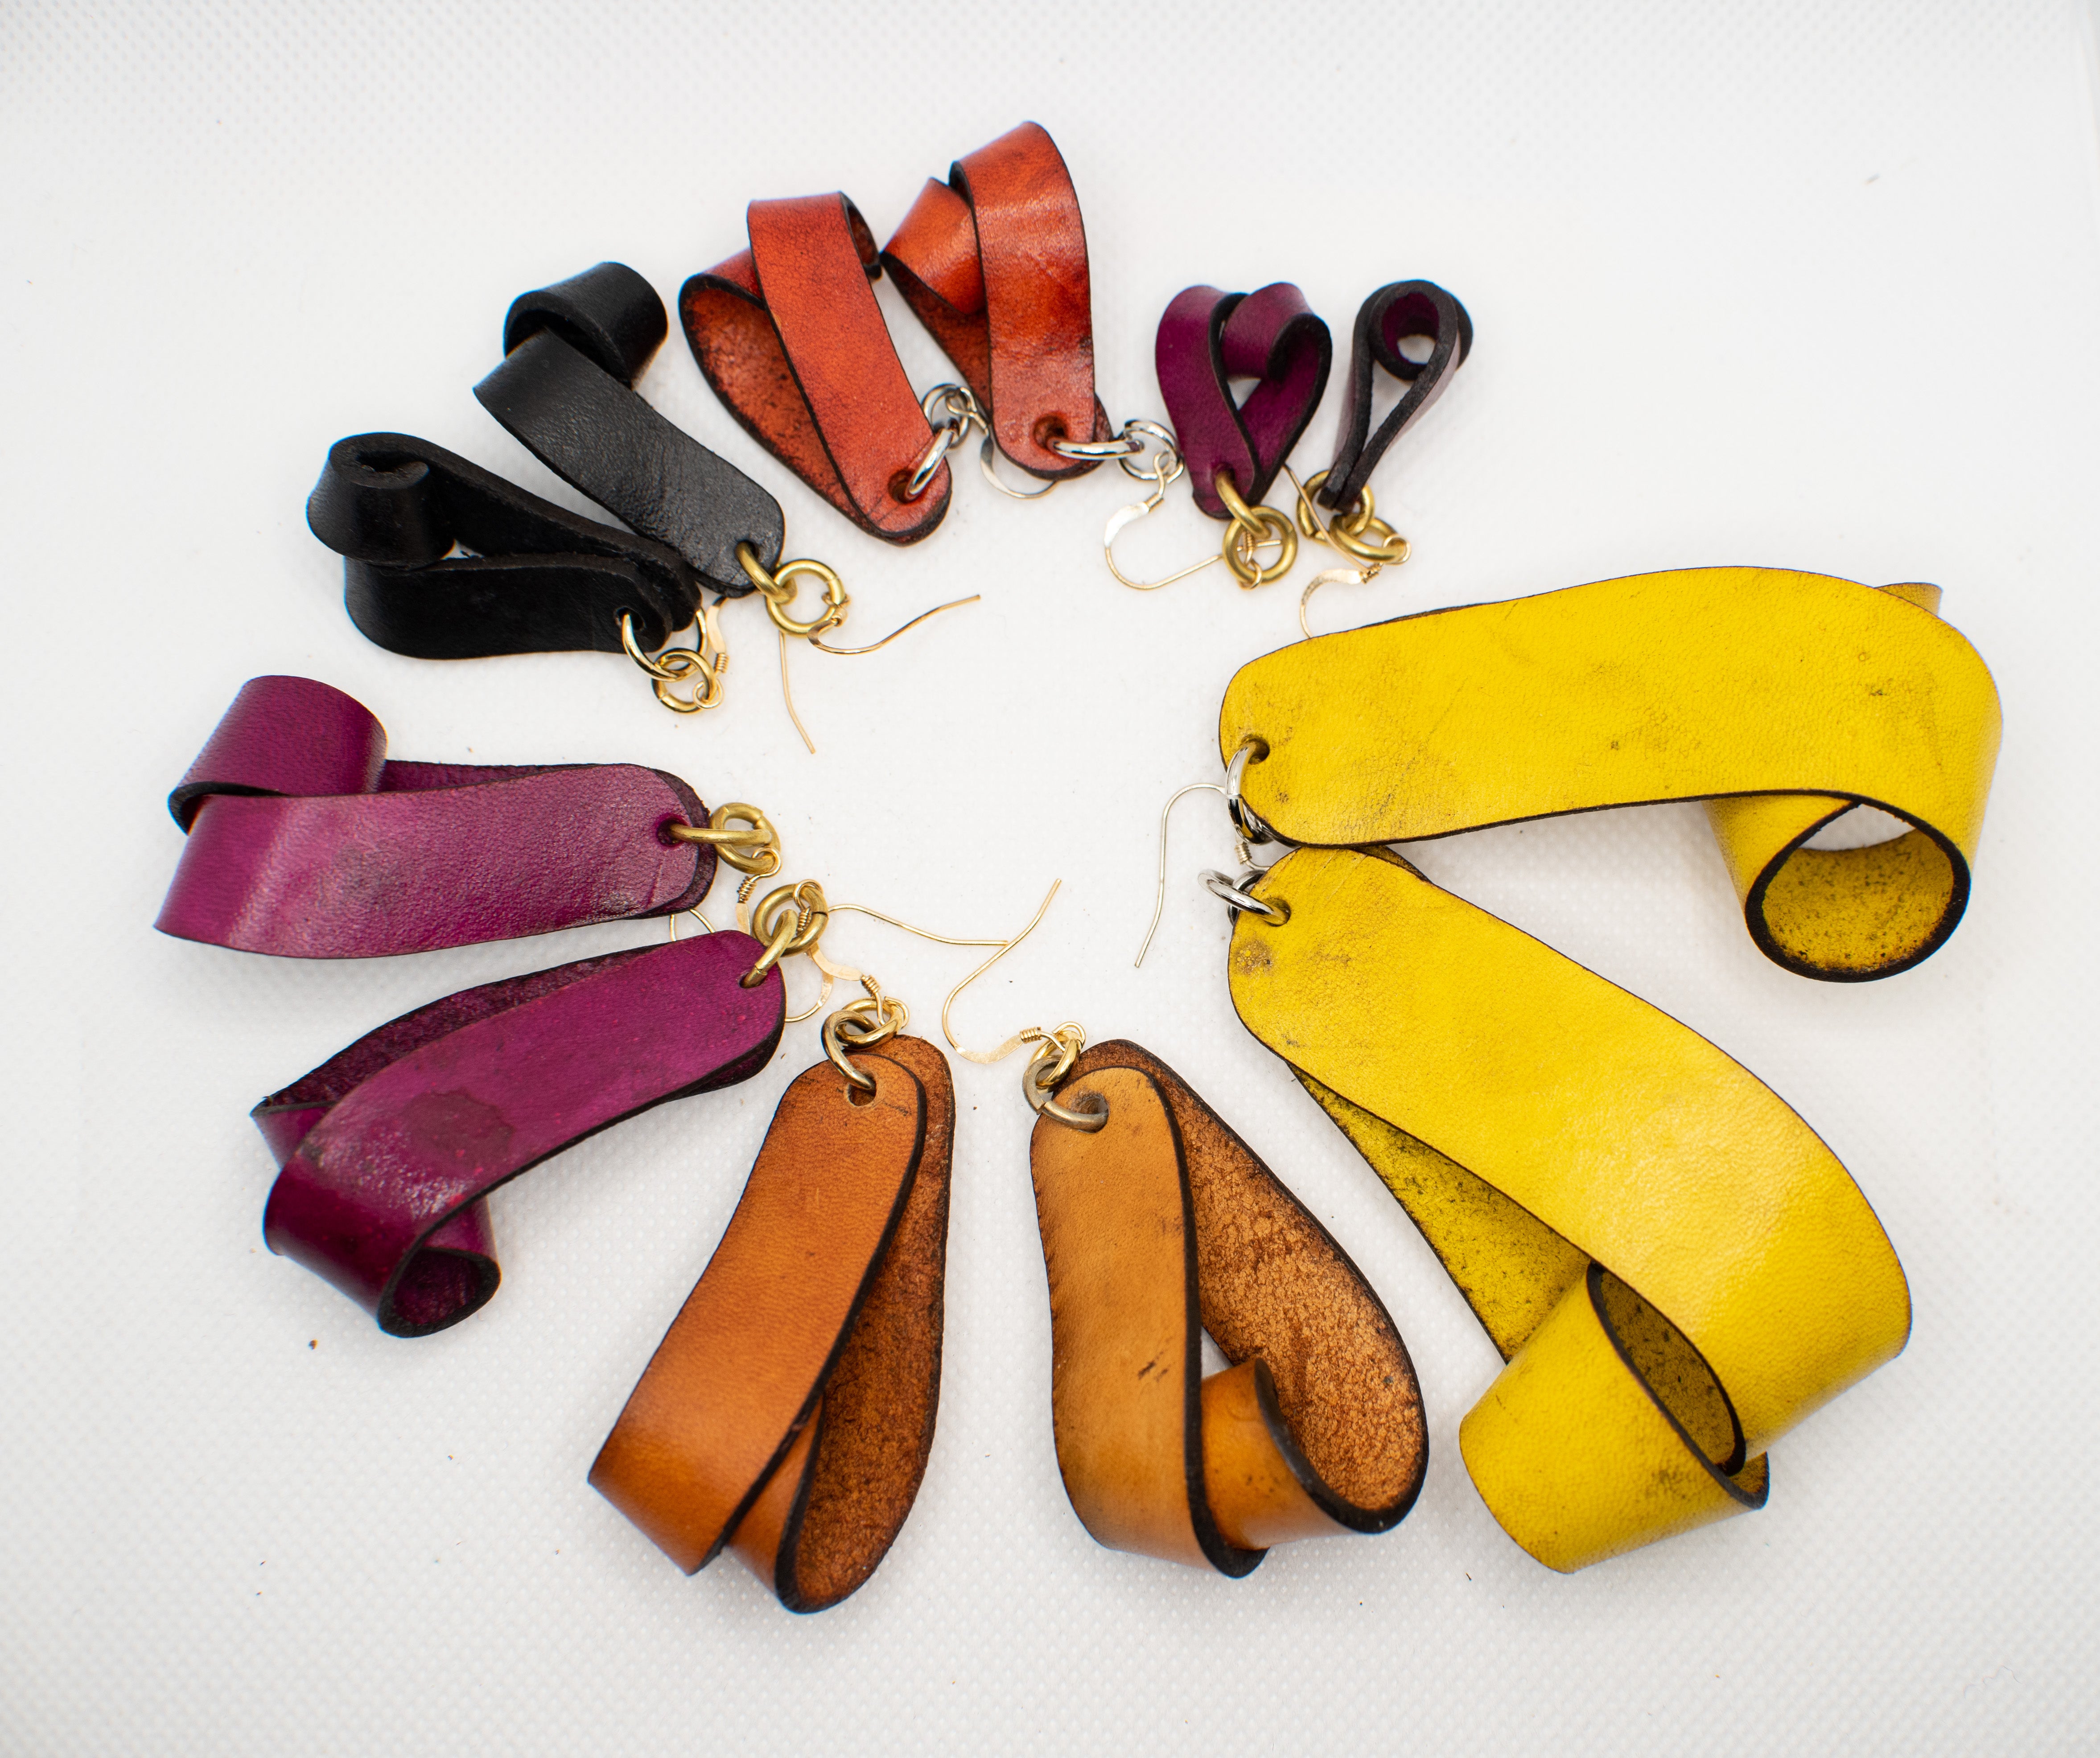 The Carla Mini Leather Earrings - Black (Hand Dyed)